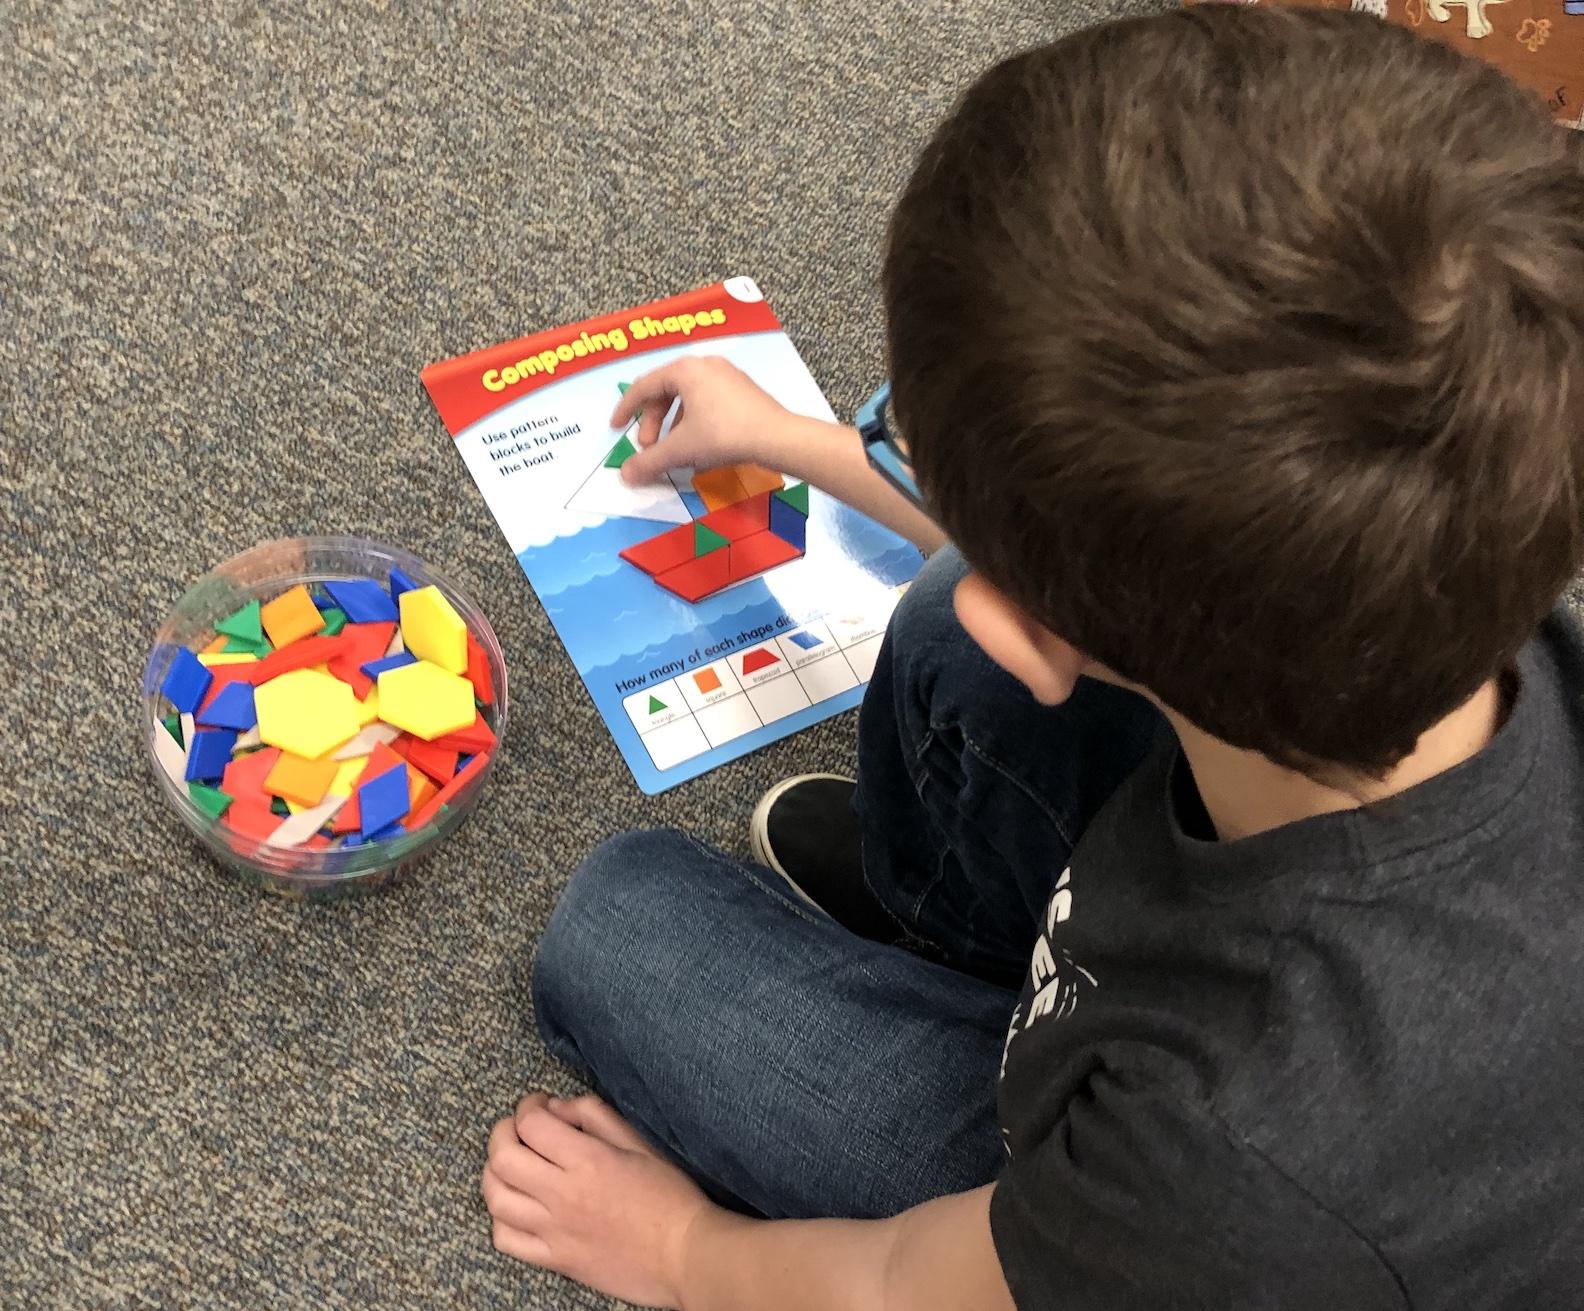 Liam Tunstall composes shapes using the new pattern blocks